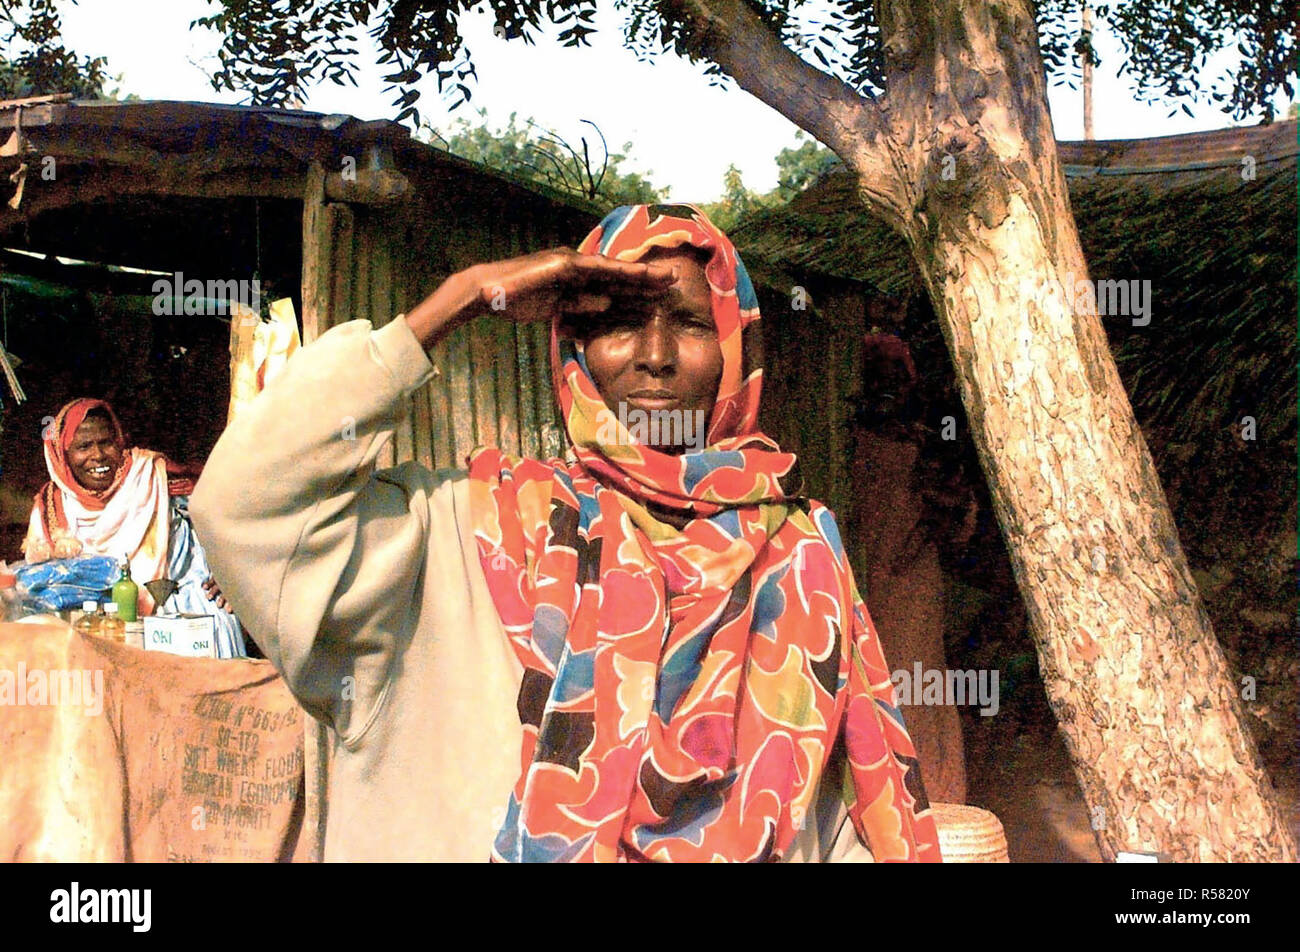 1993 - Straight on shot of a Somali woman from the waist up as she renders a salute to show her support for American Forces (not shown) in Somalia in support of Operation Continue Hope.  The photograph was taken in the market area of Kismayo, Somalia.  Another Somali woman is seen at the left in the background and she's laughing. Stock Photo